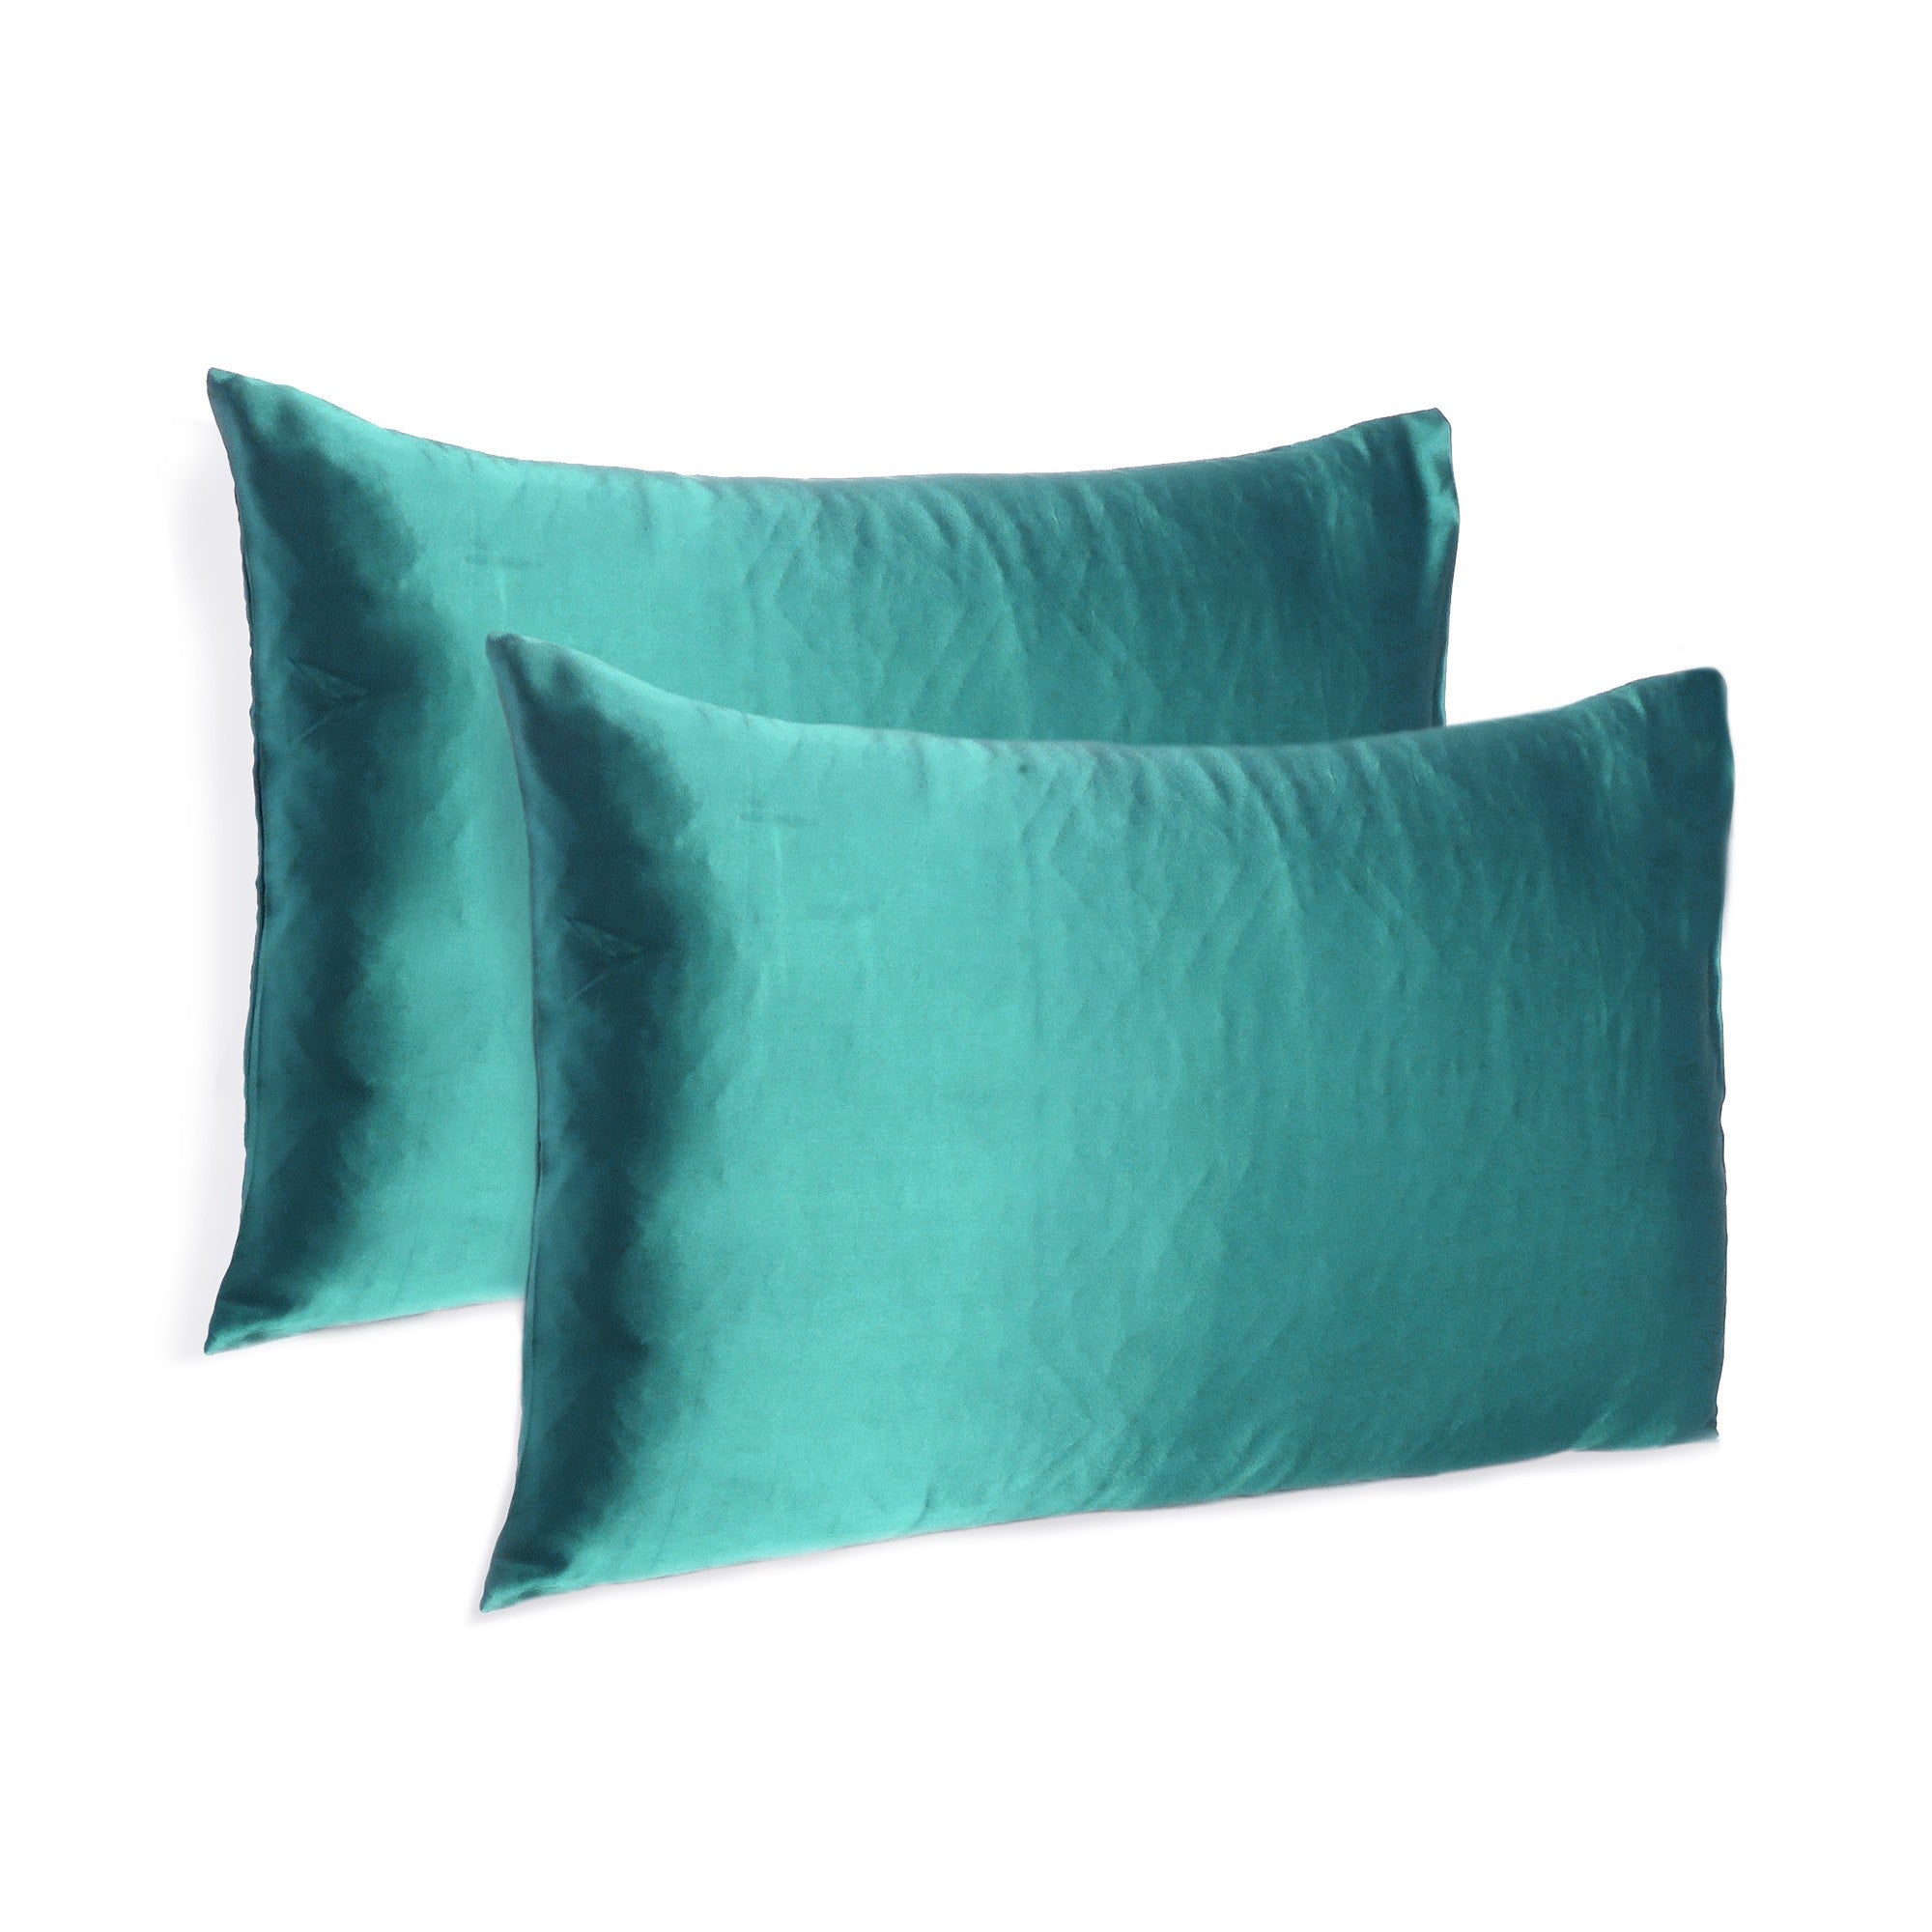 Teal-Dreamy-Set-Of-2-Silky-Satin-Queen-Pillowcases-Bed-Sheets